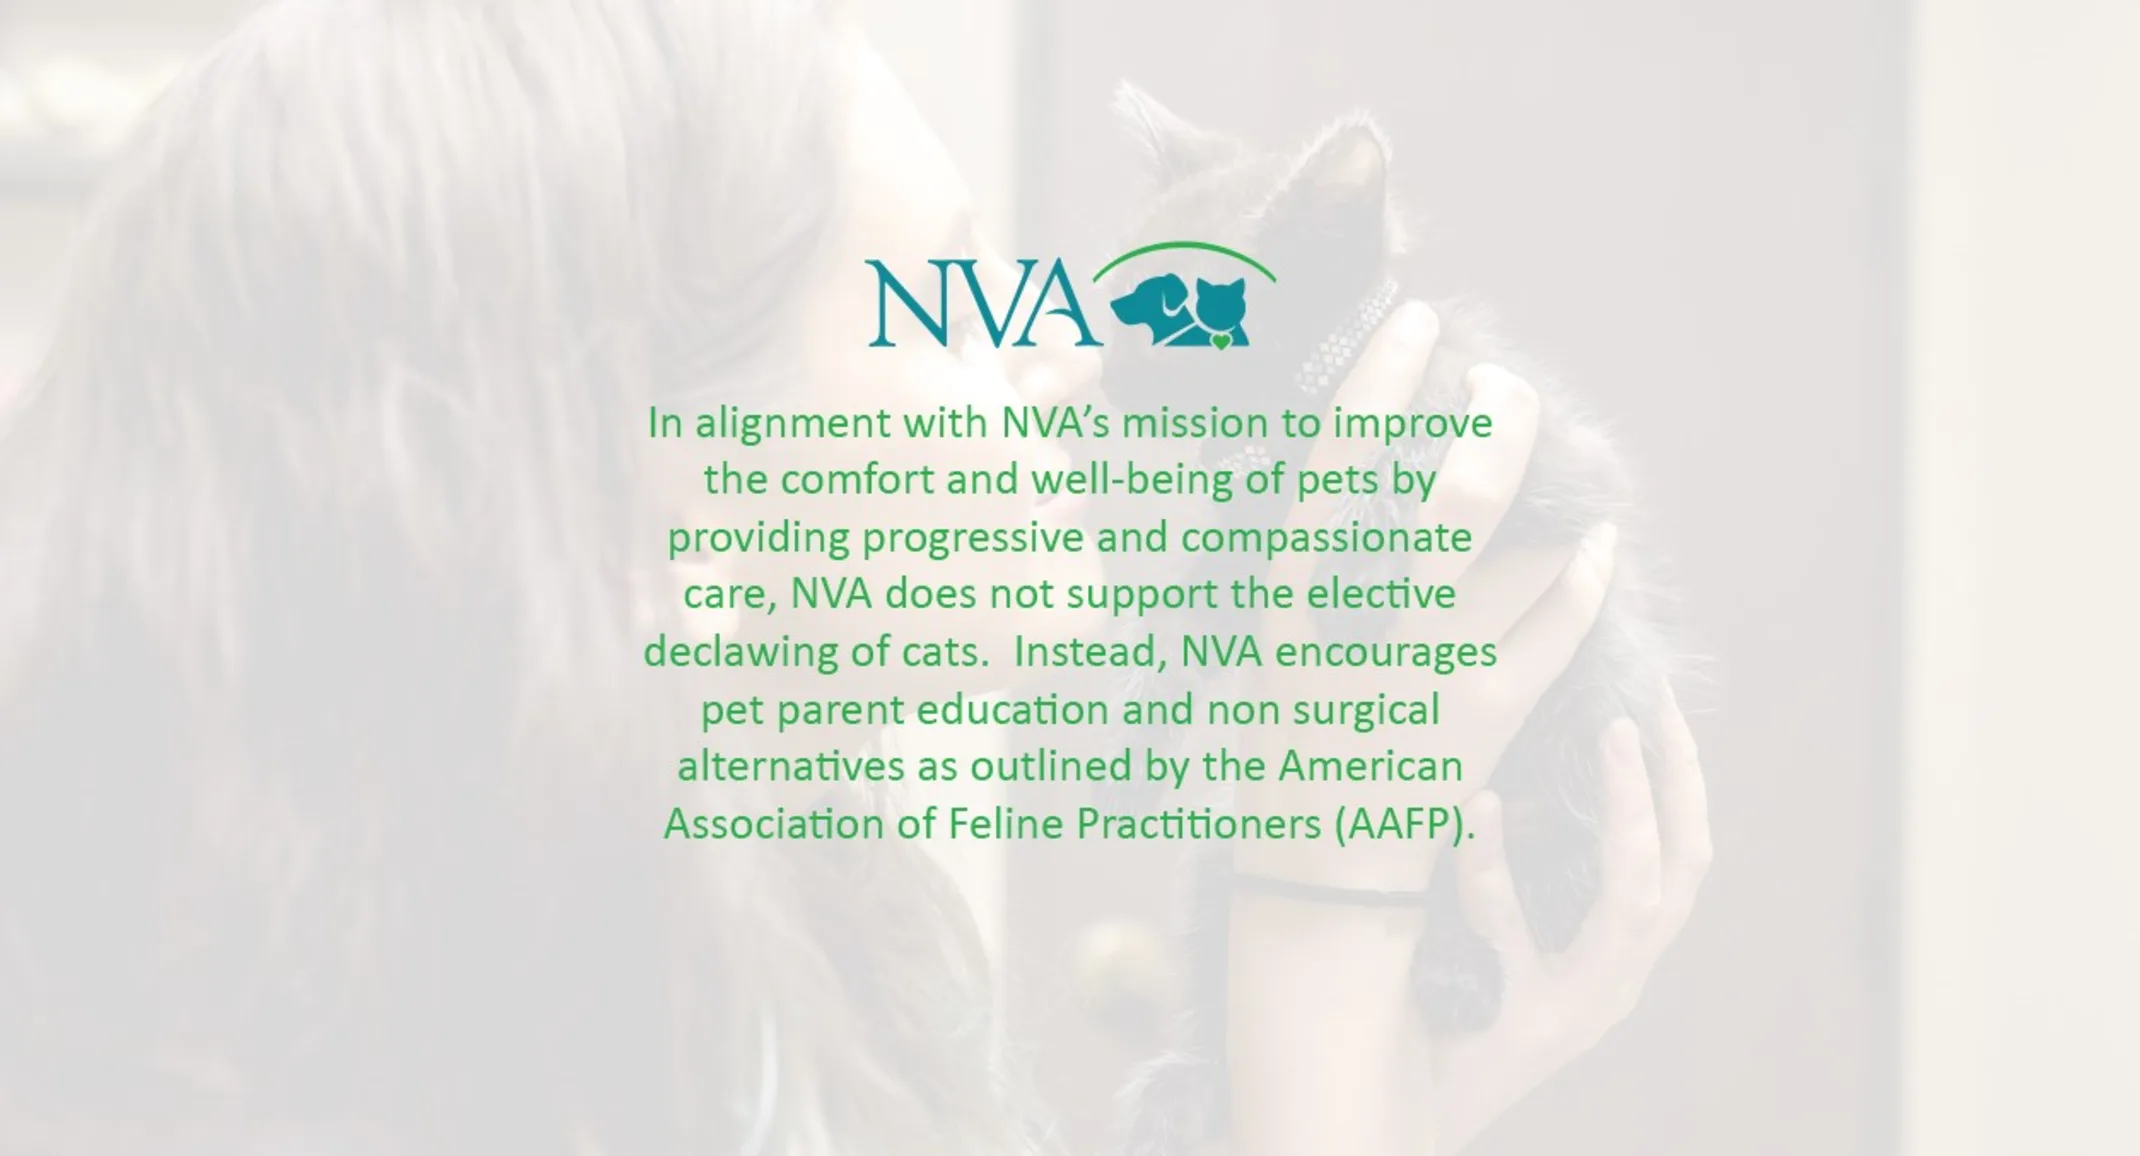 NVA does not support the elective declawing of cats. Instead, NVA encourages pet parent education and non surgical alternatives as outlined by the American Association of Feline Practitioners (AFFP).